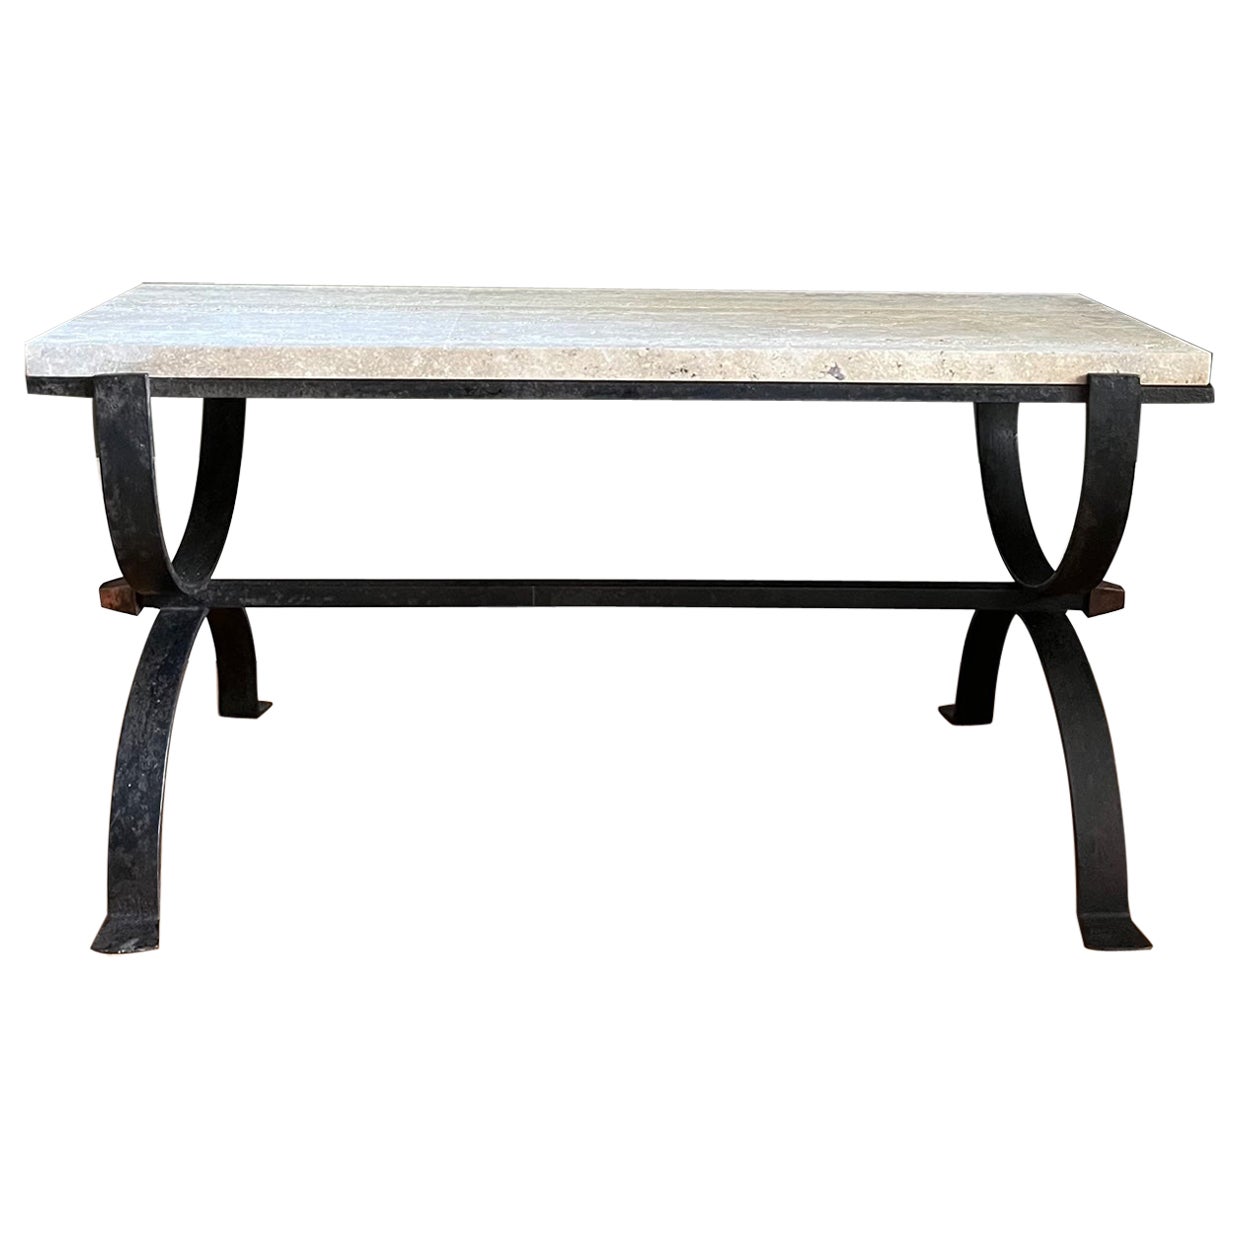 Small Wrought Iron and Travertine Coffee Table, French, c.1950s For Sale